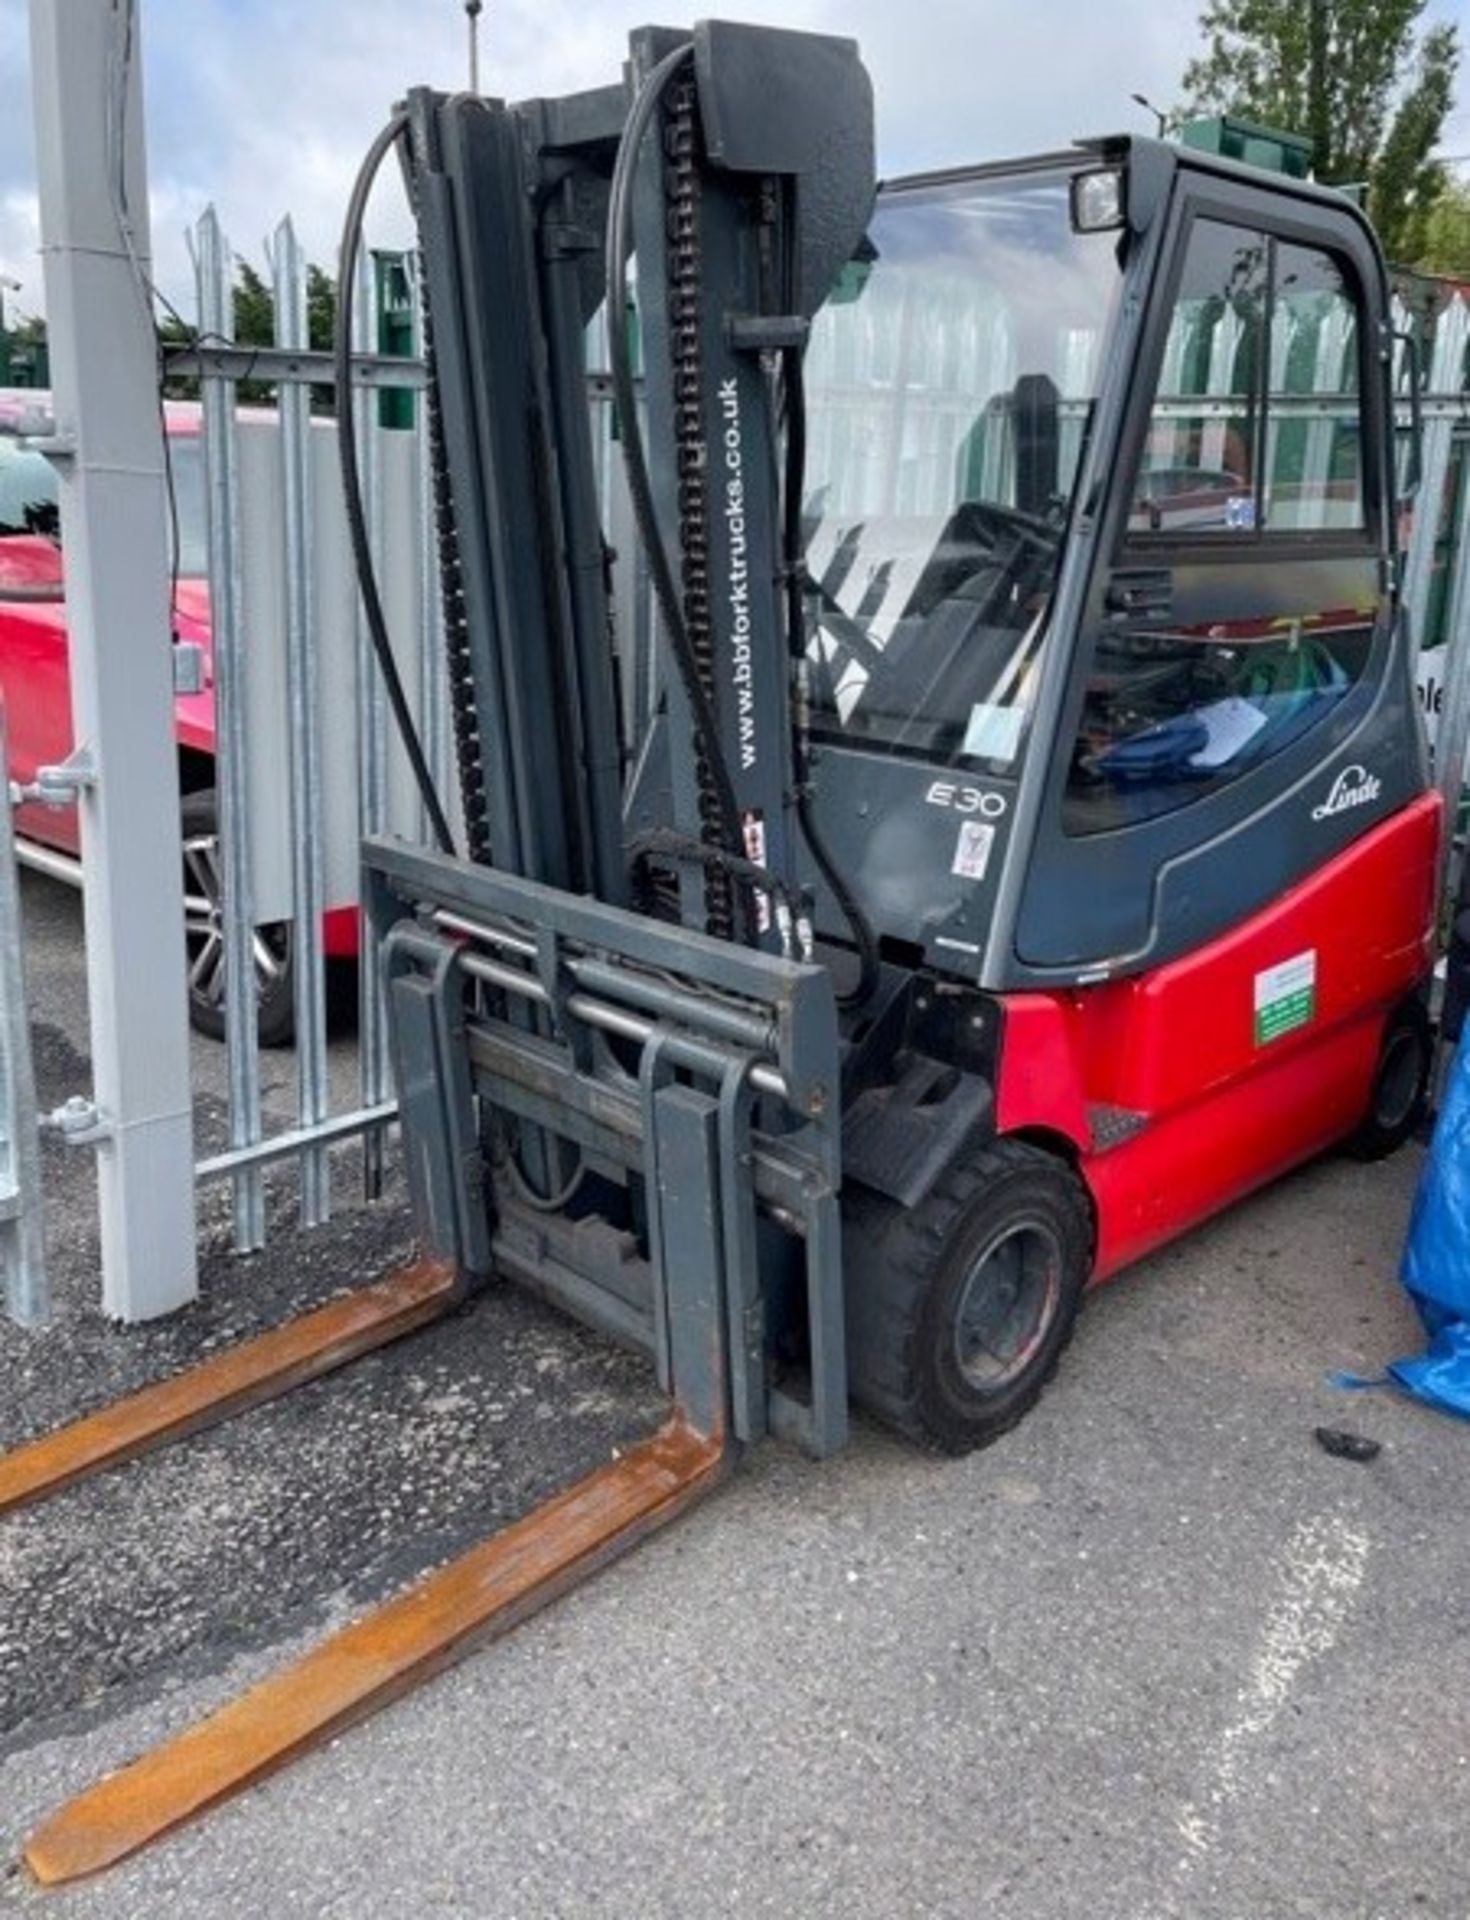 Linde E30 4 Wheel Electric Forklift (2008) 3000Kg Capacity, Serial Number; G1X336W50734 with Side